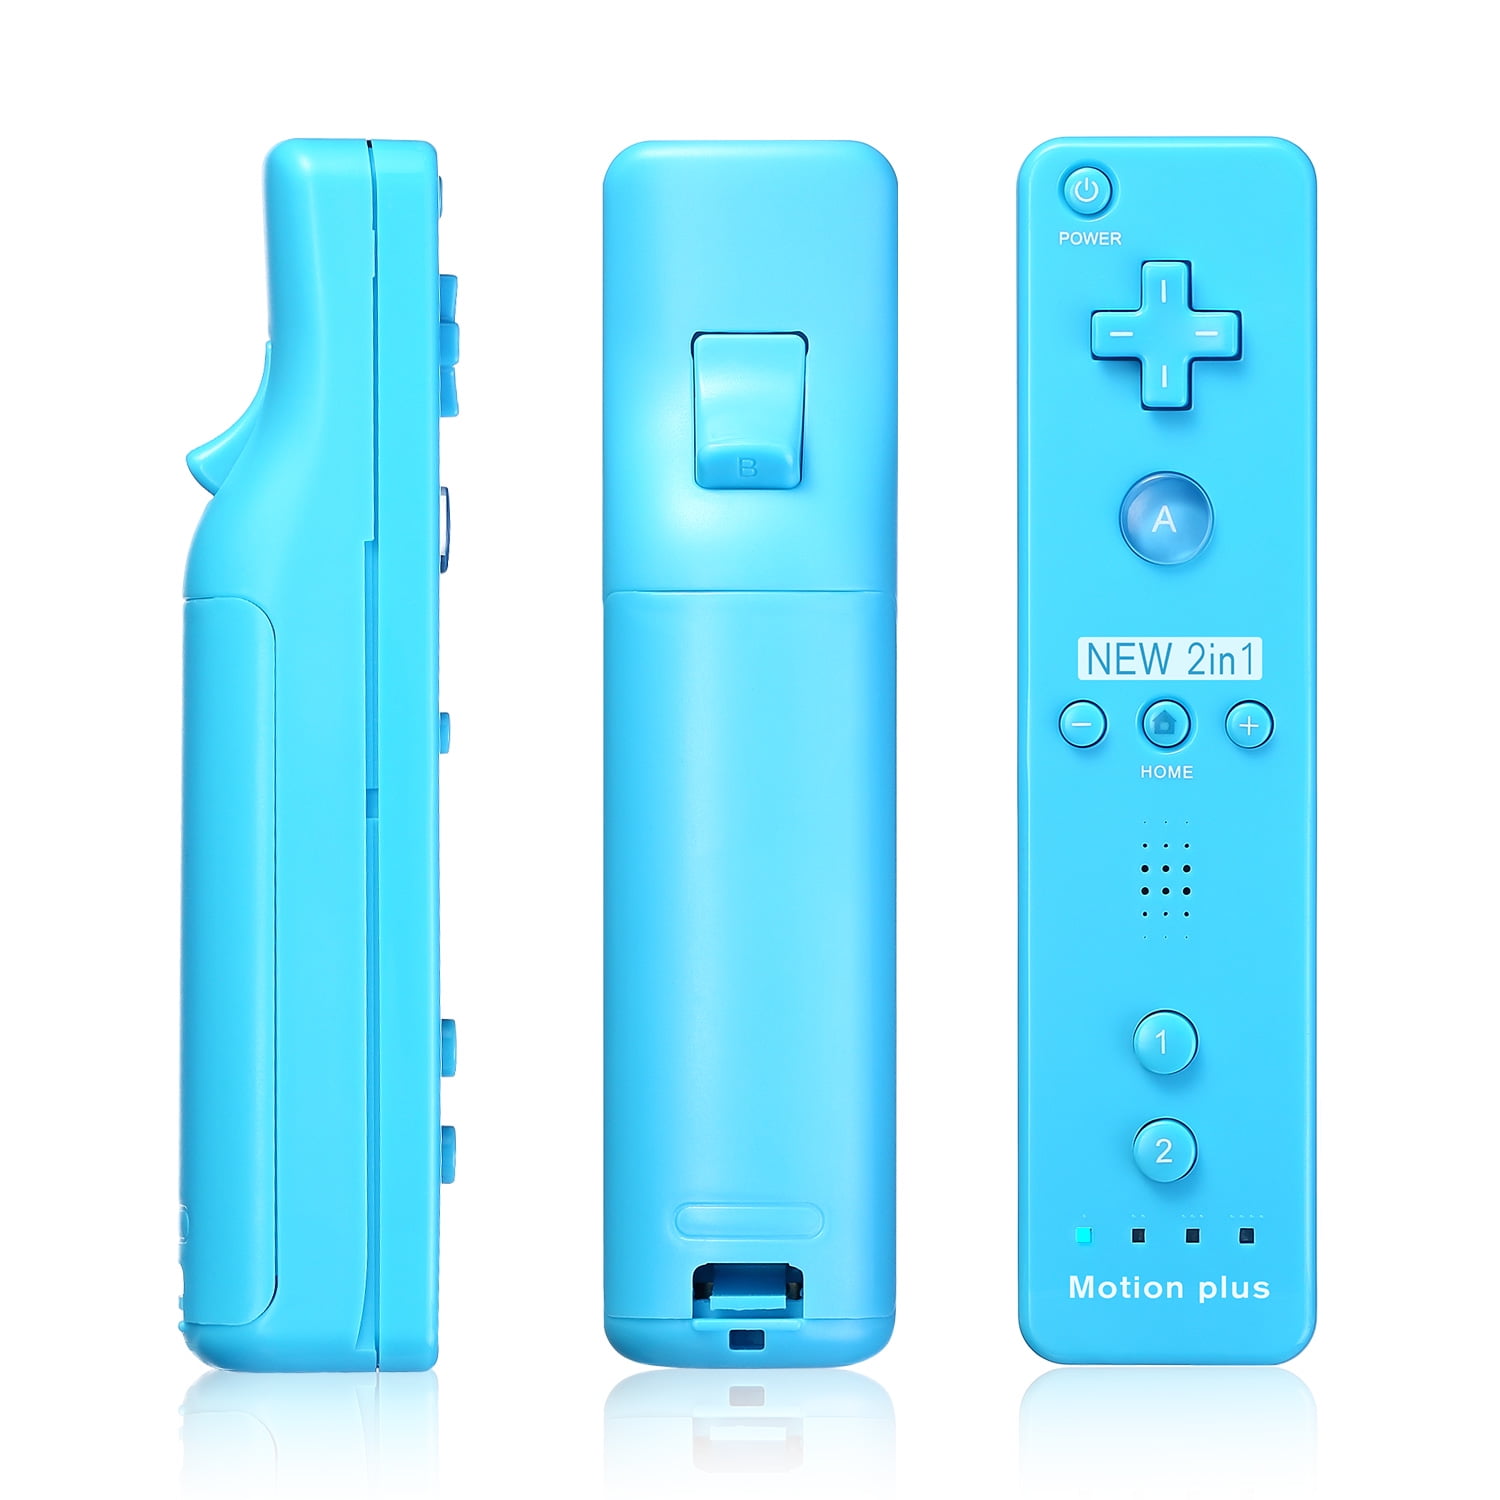 equipo Rechazar fluido Motion Plus Remote Controller for Nintendo Wii / Wii U Console Video Game  with Case - Walmart.com